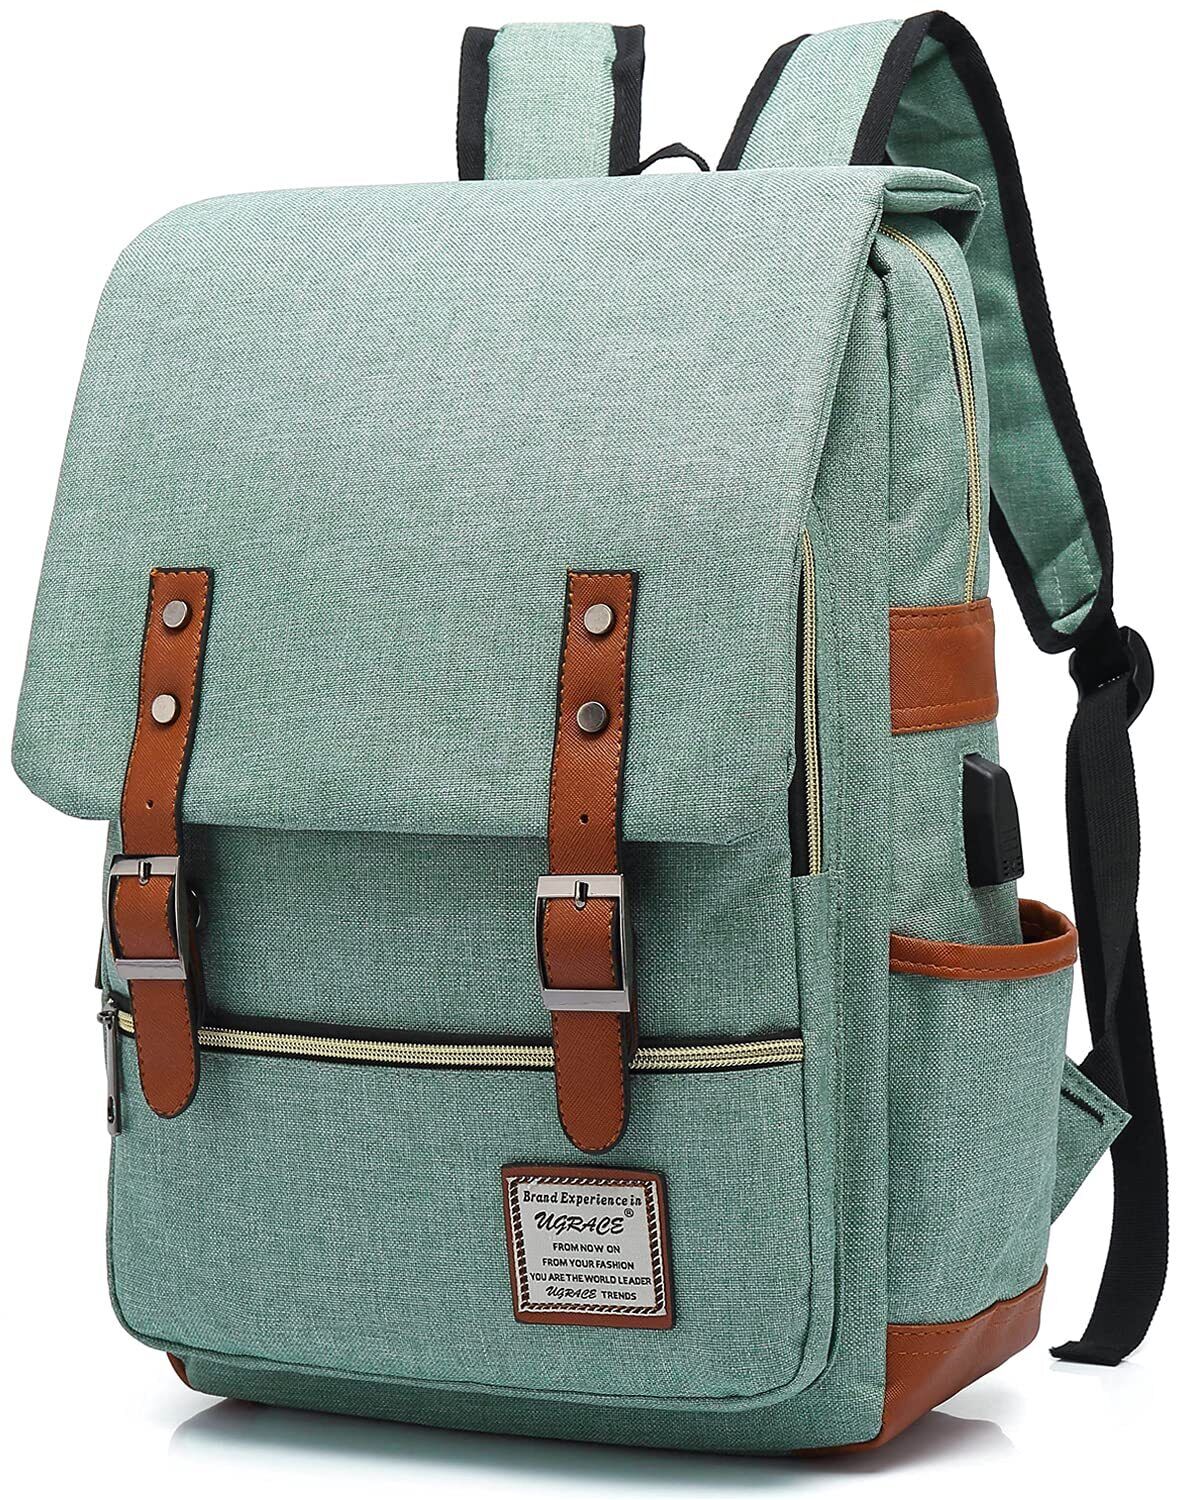 Vintage Laptop Backpack with USB Charging Port, Water Resistant Travelling Ba...